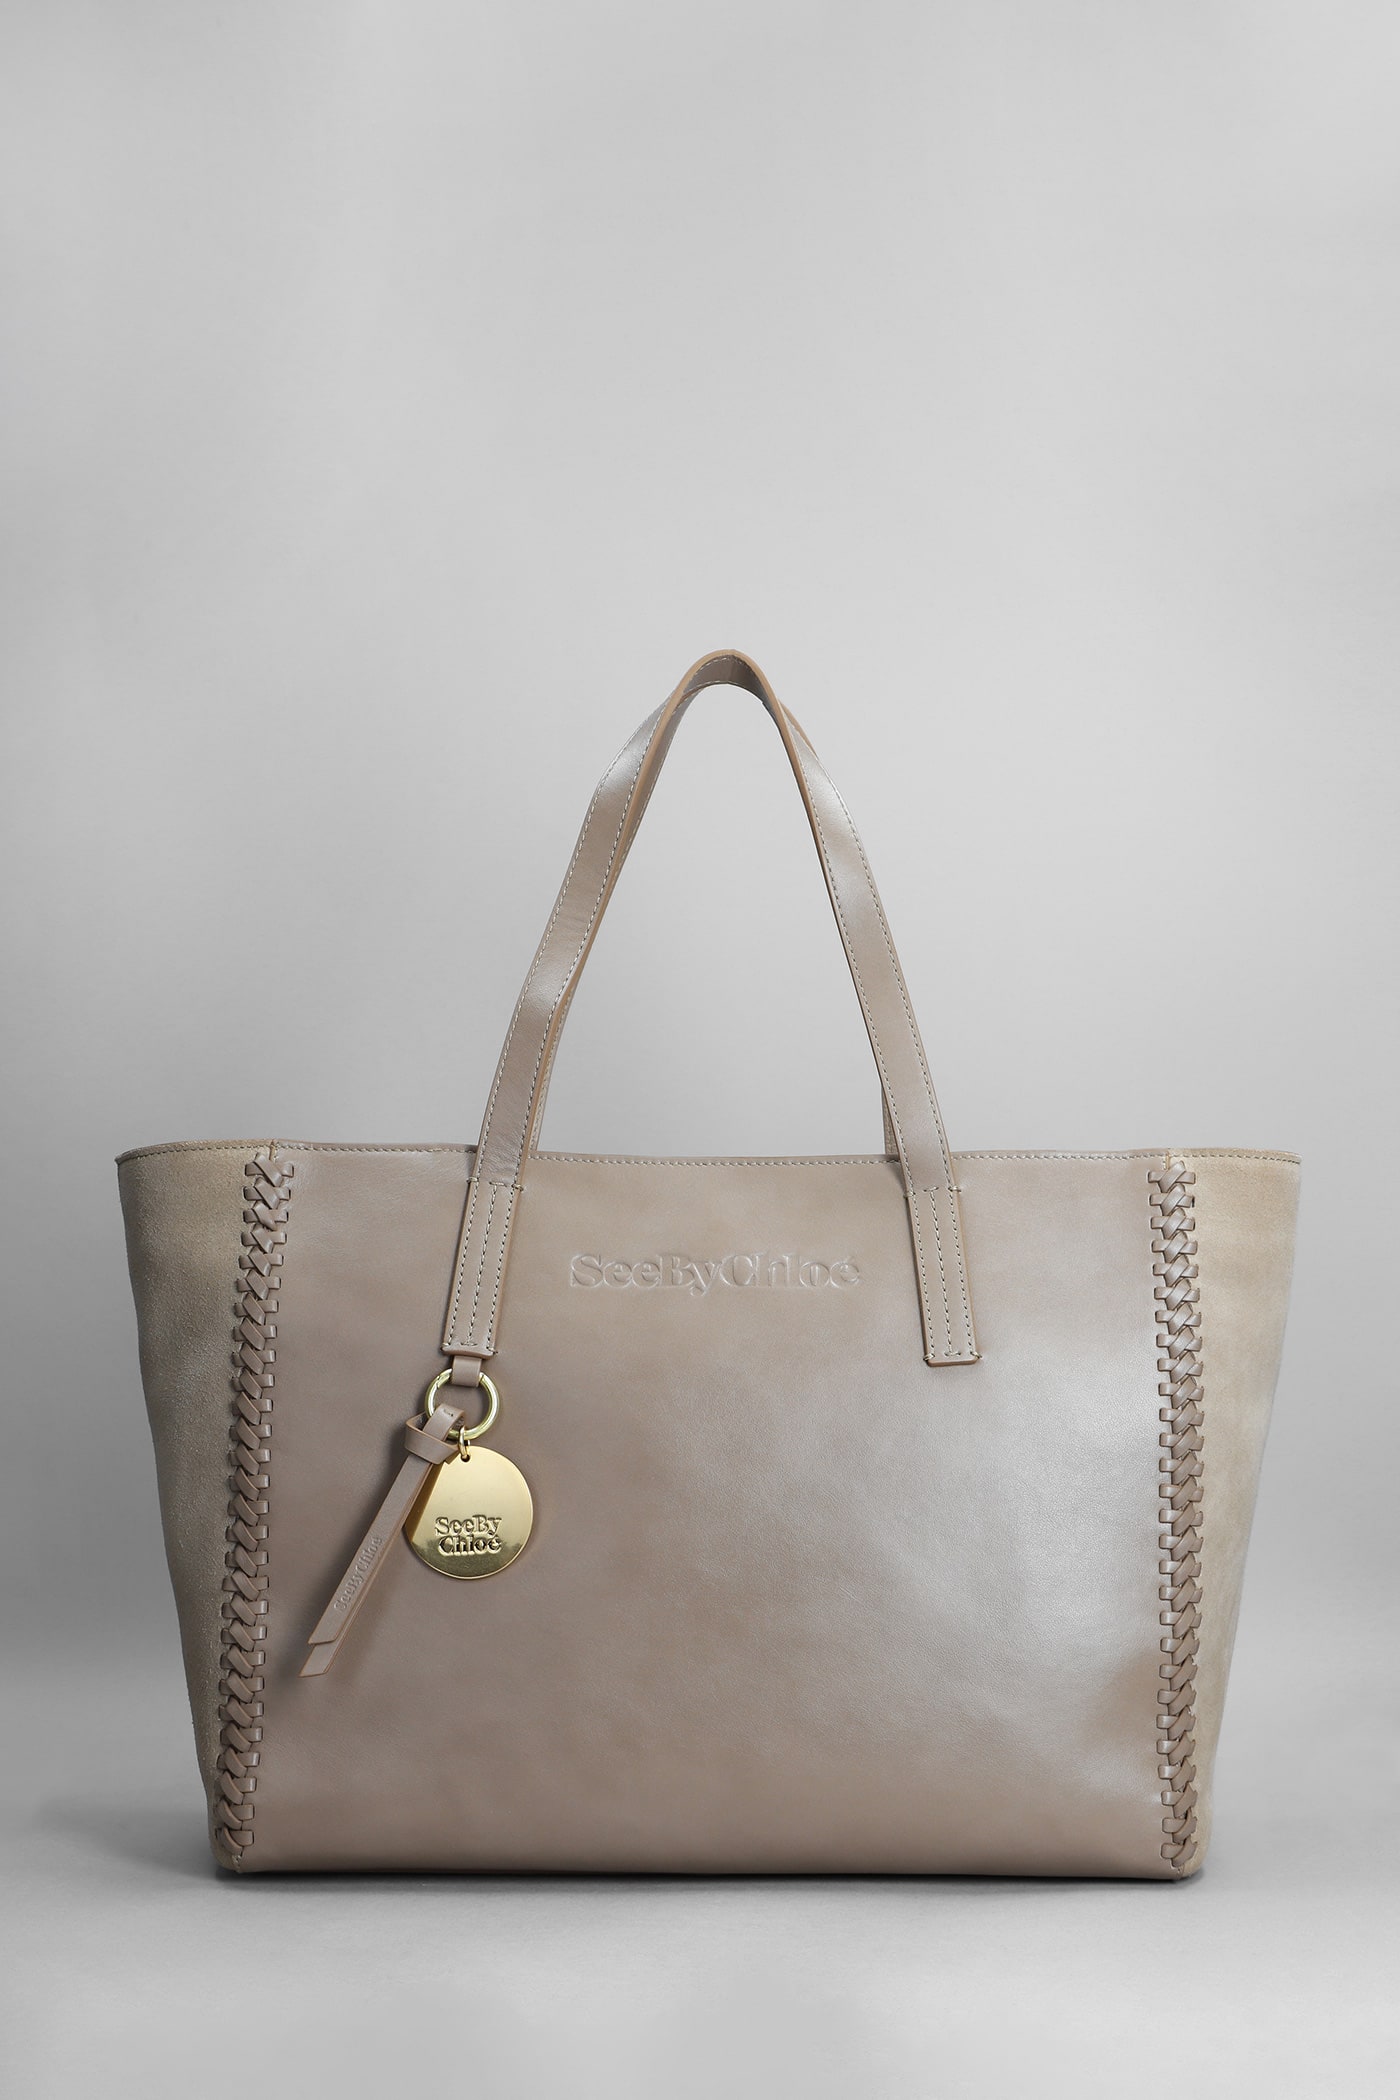 See by Chloé Tilda Sbc Tote In Grey Leather